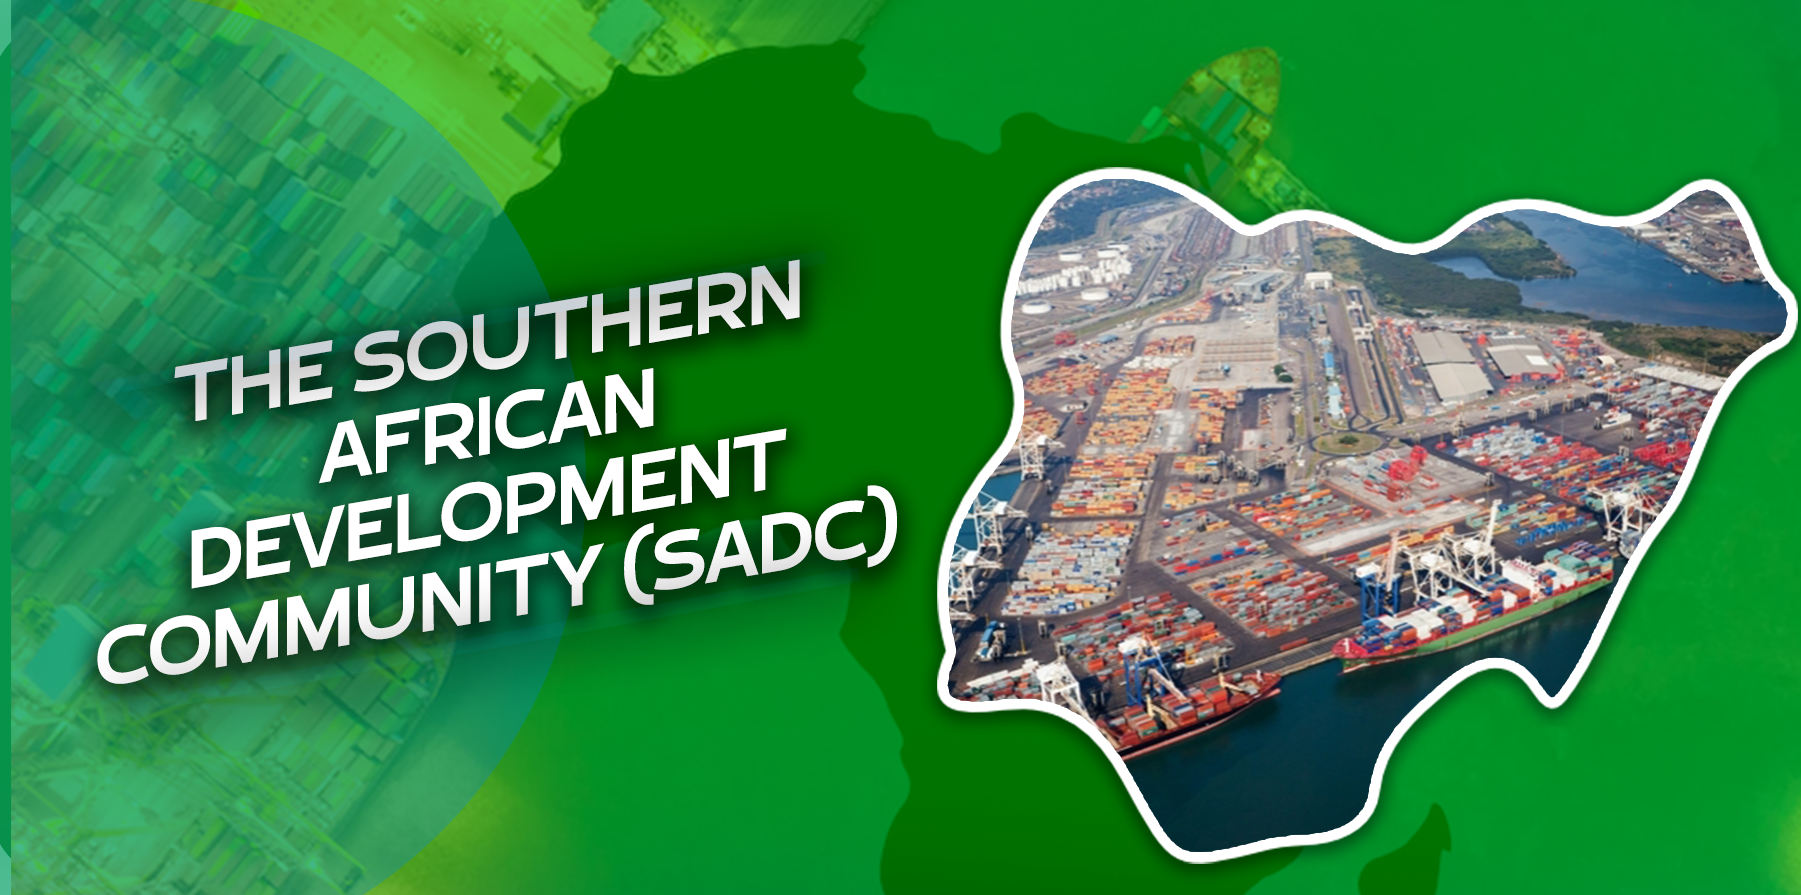 The Southern African Development Community (SADC)